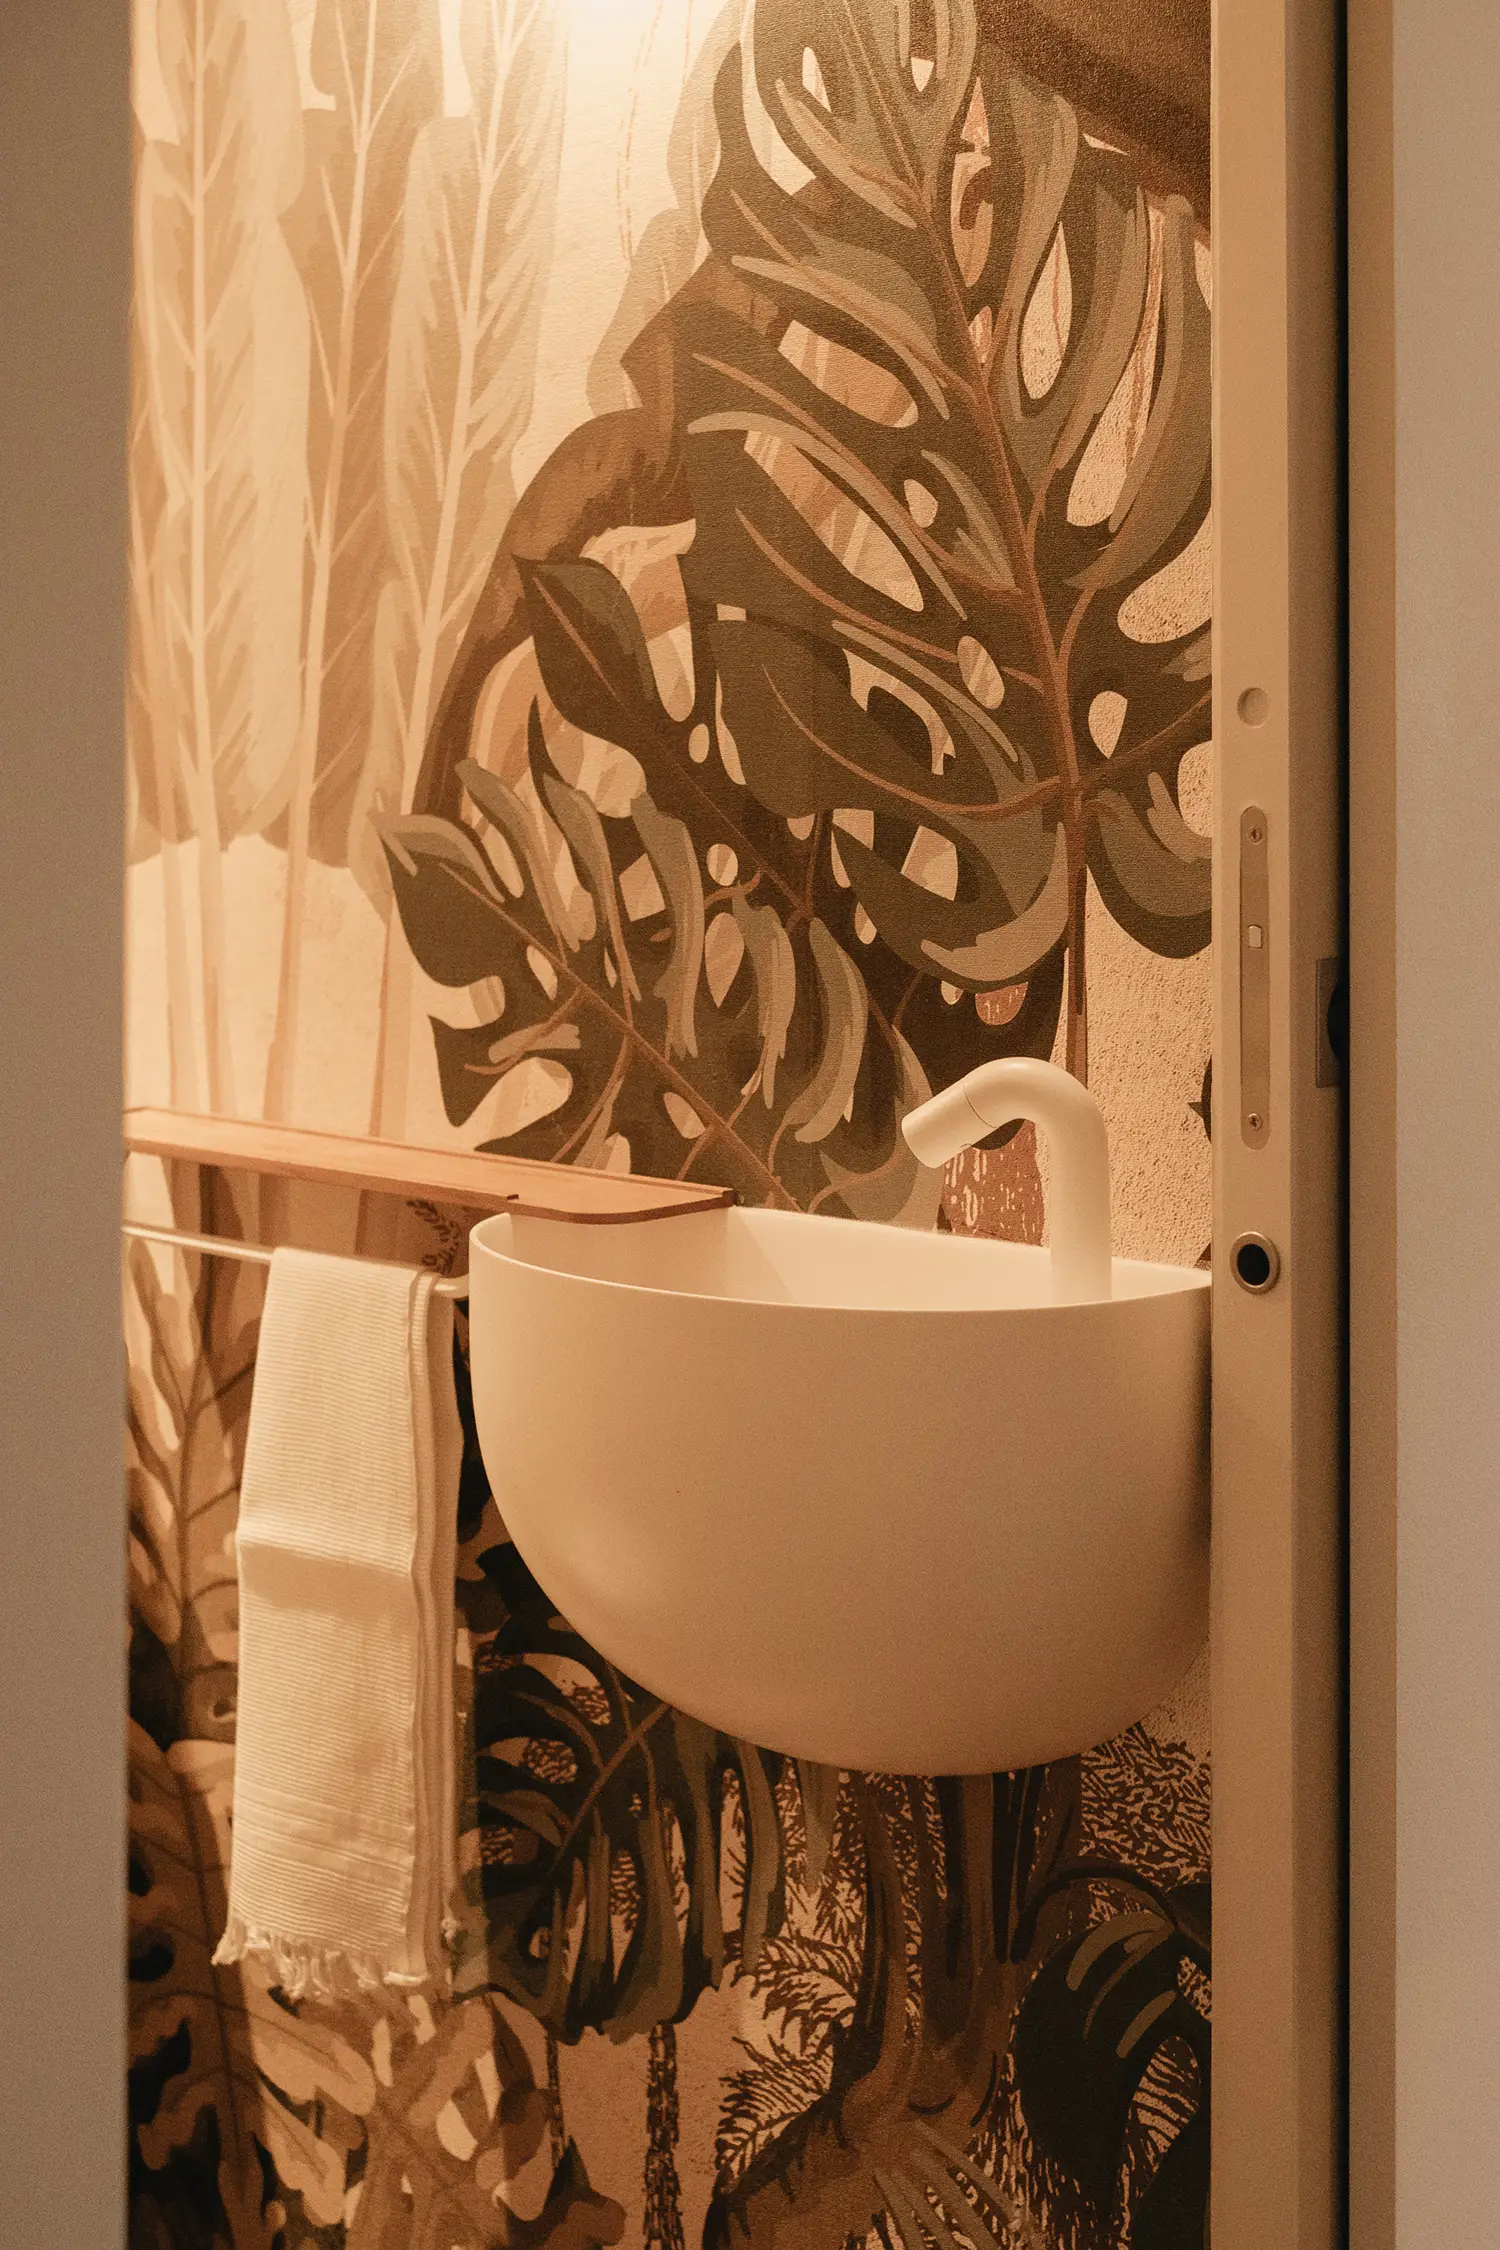 Photo of the hand-washer in the toilet with retractable door, eco-friendly atmosphere by bringing a tropical garden into the room following one of the different principles of biophilia; renovation project by the studio Elles Interior Design.